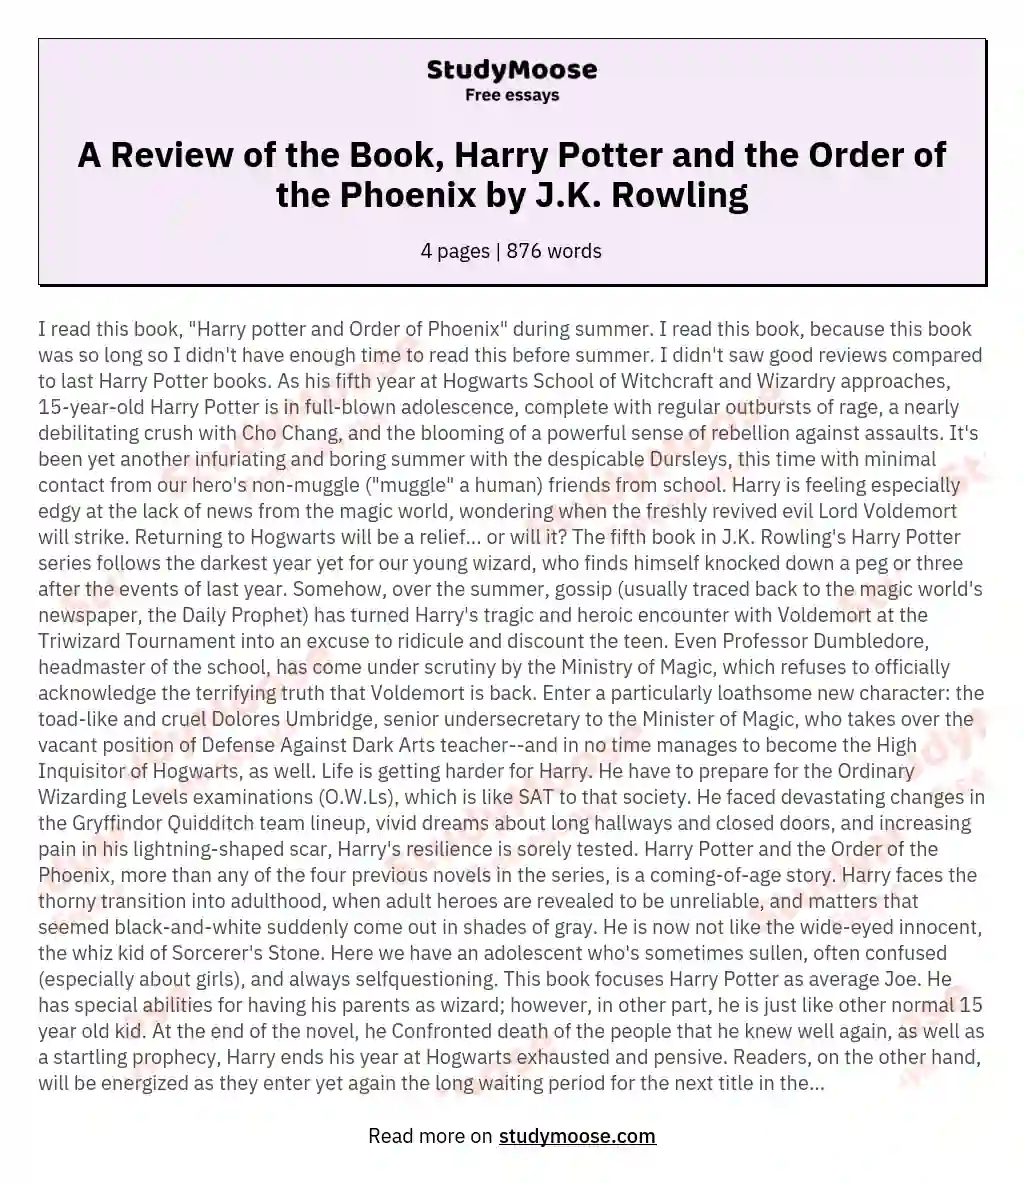 A Review of the Book, Harry Potter and the Order of the Phoenix by J.K. Rowling essay